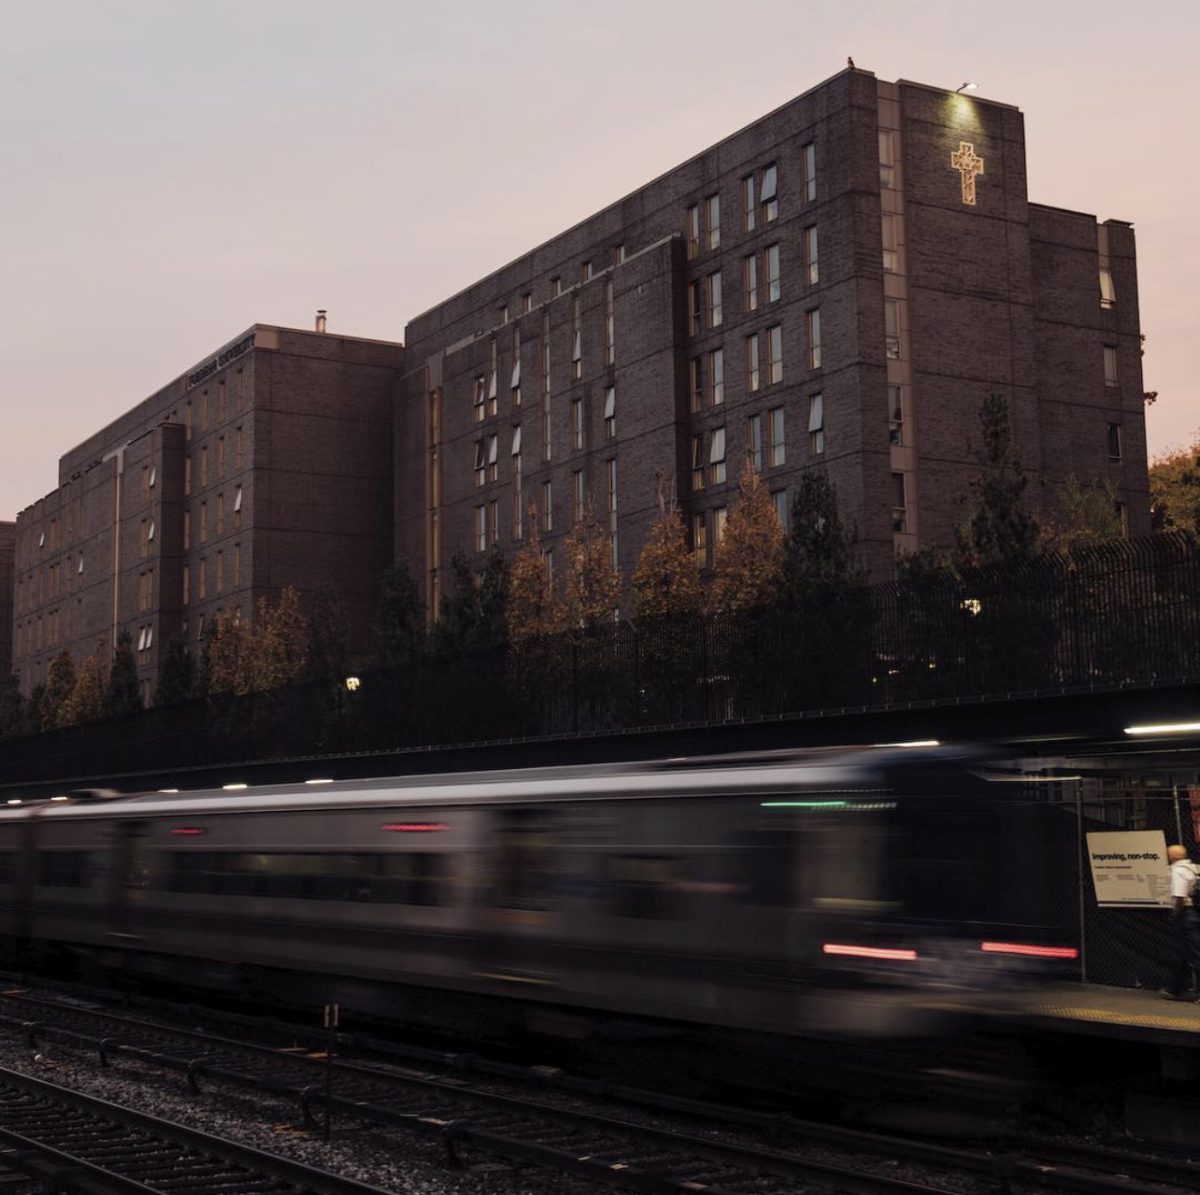 Commuters+experience+at+Fordham+differs+from+residents.